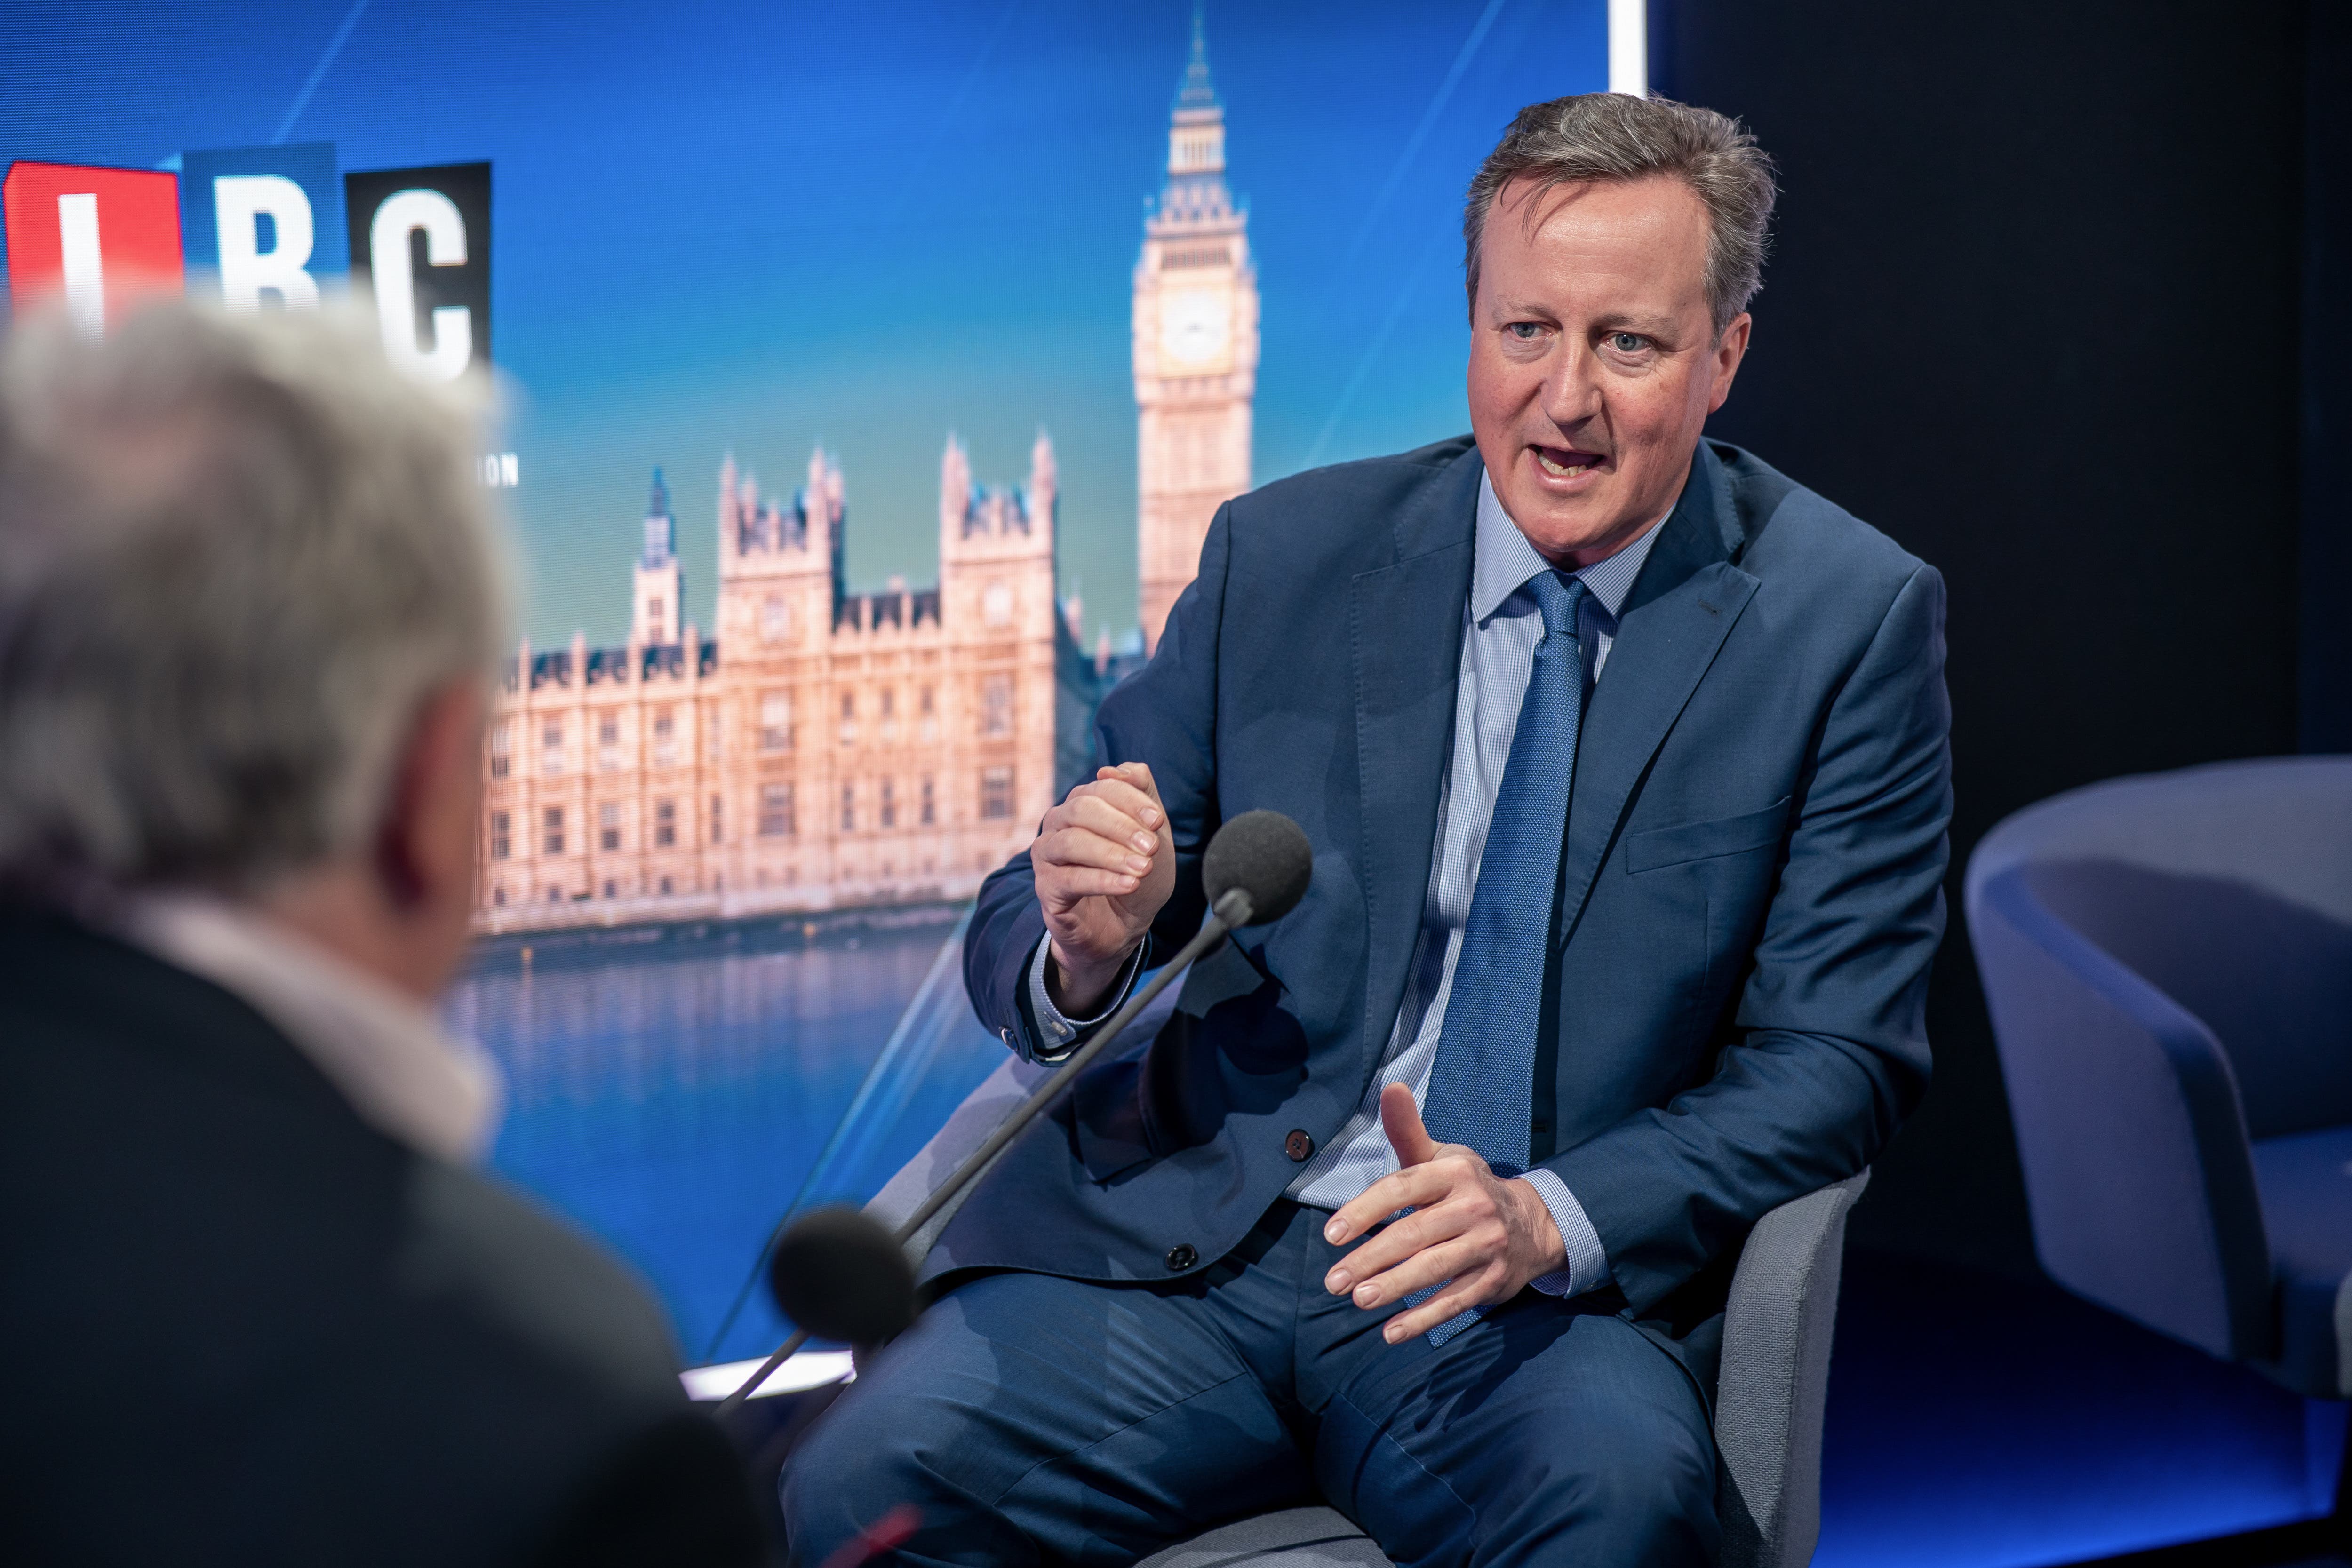 David Cameron being interviewed by LBC in May